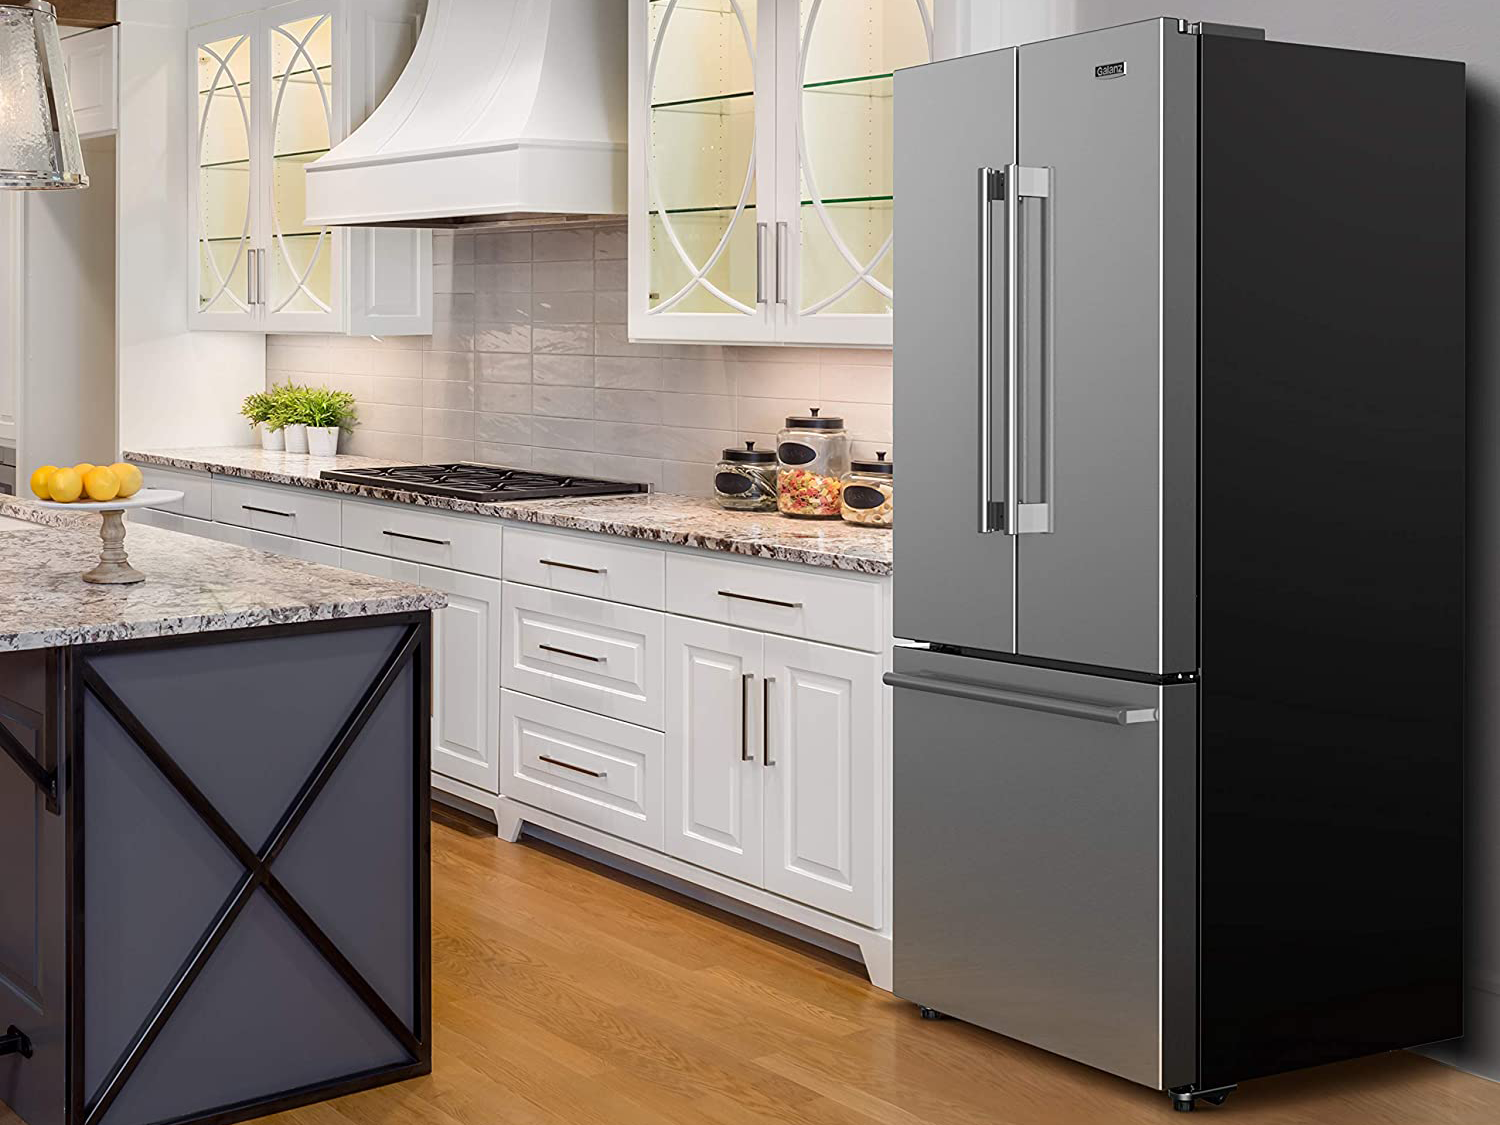 Labor Day refrigerator sales Amazon has the best deals of 2021